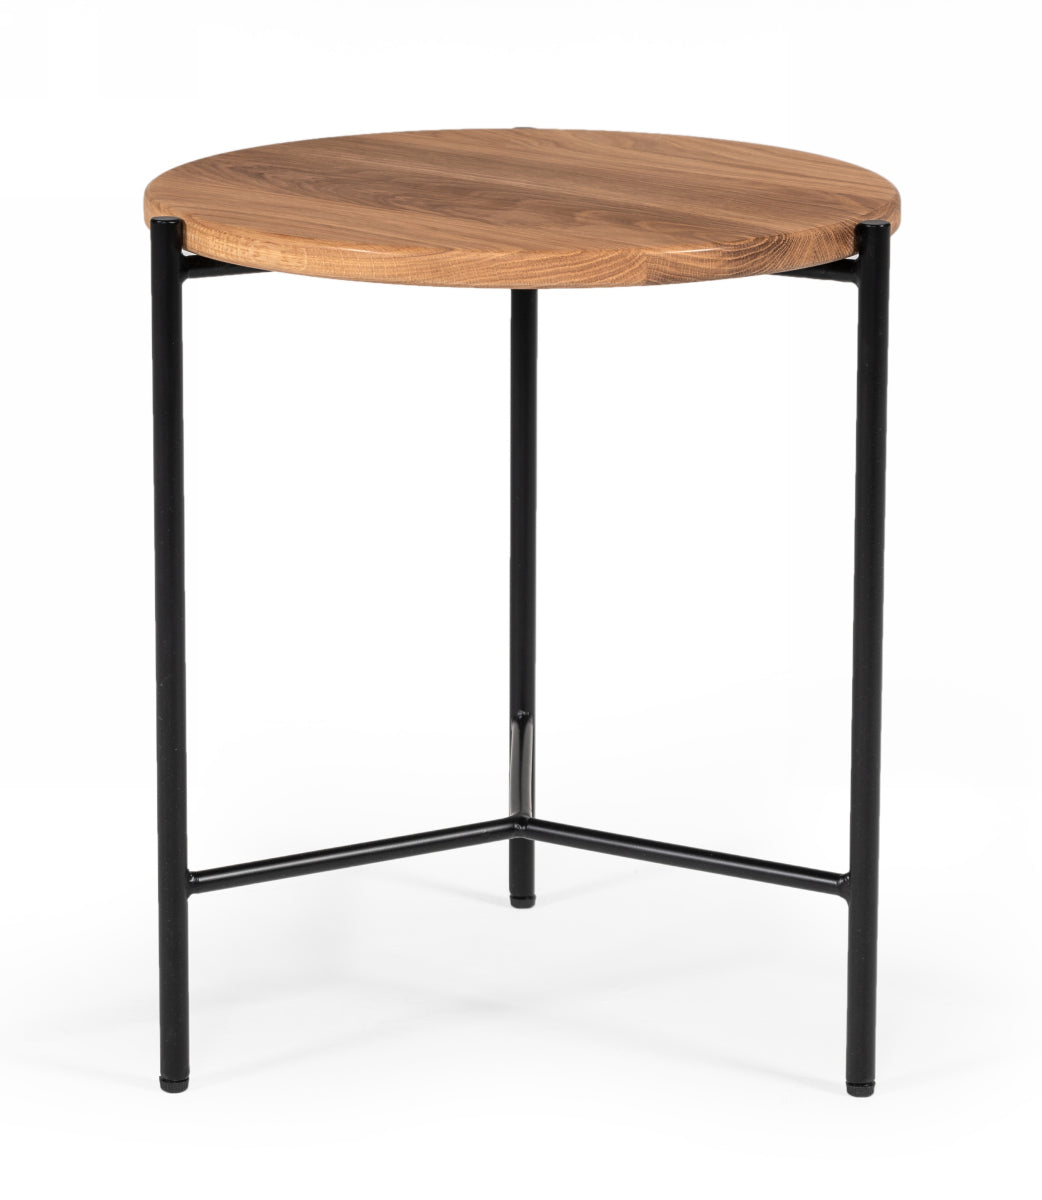 Modrest Bacone - Industrial Oak and Black Iron End Table